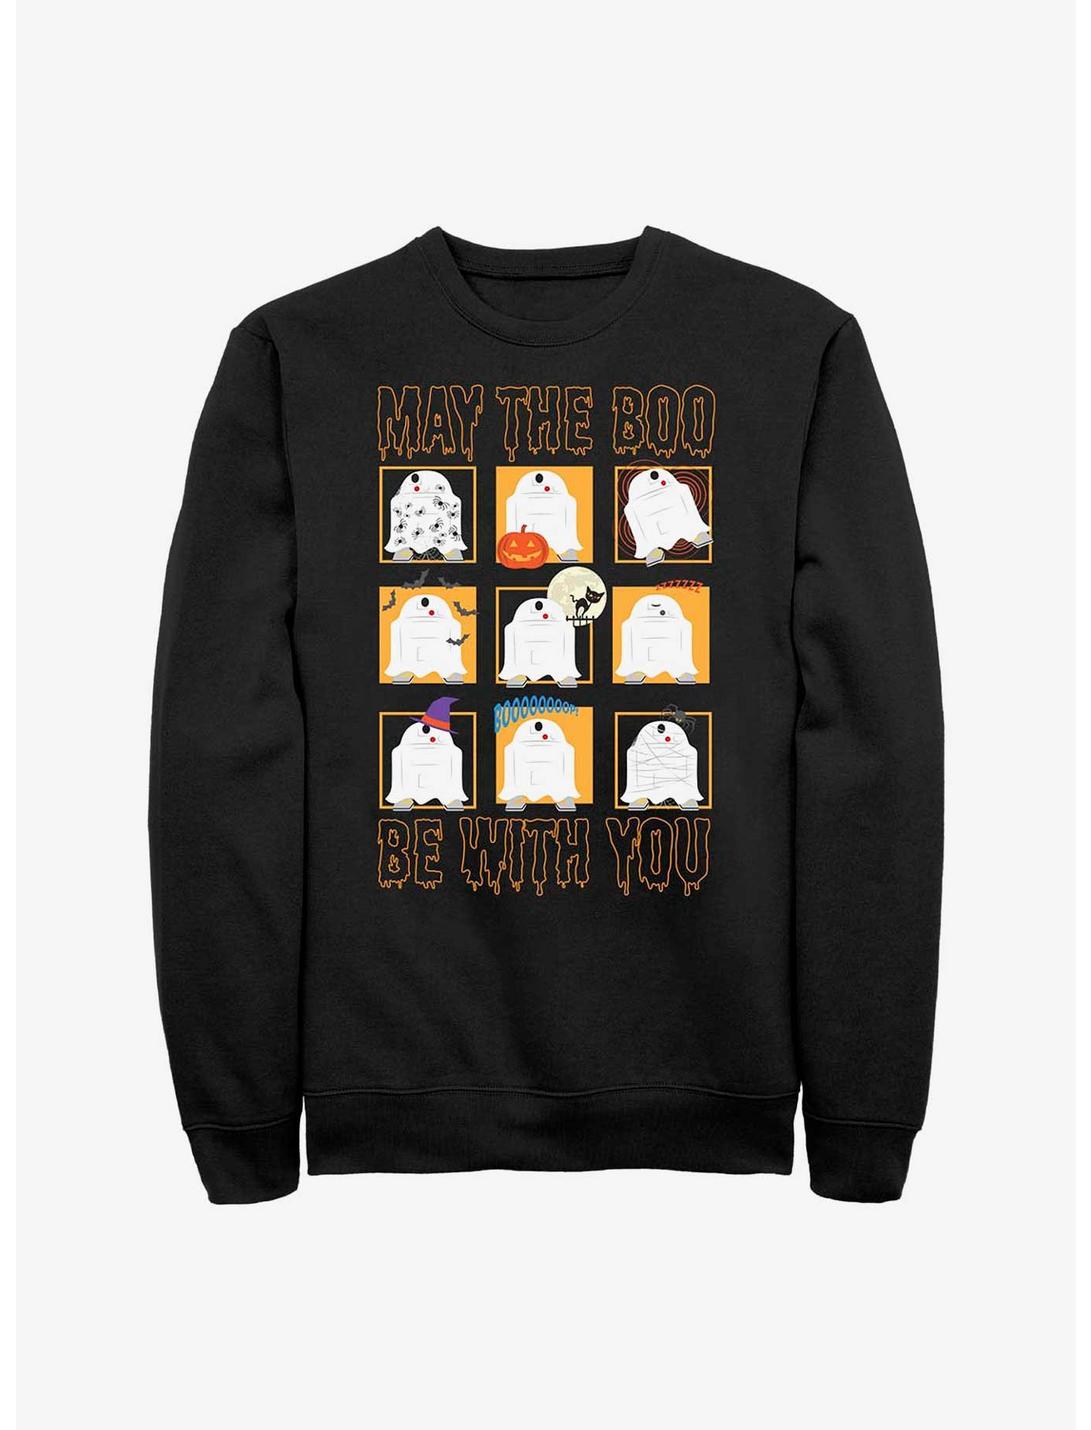 Star Wars R2-D2 May The Boo Be With You Sweatshirt, BLACK, hi-res